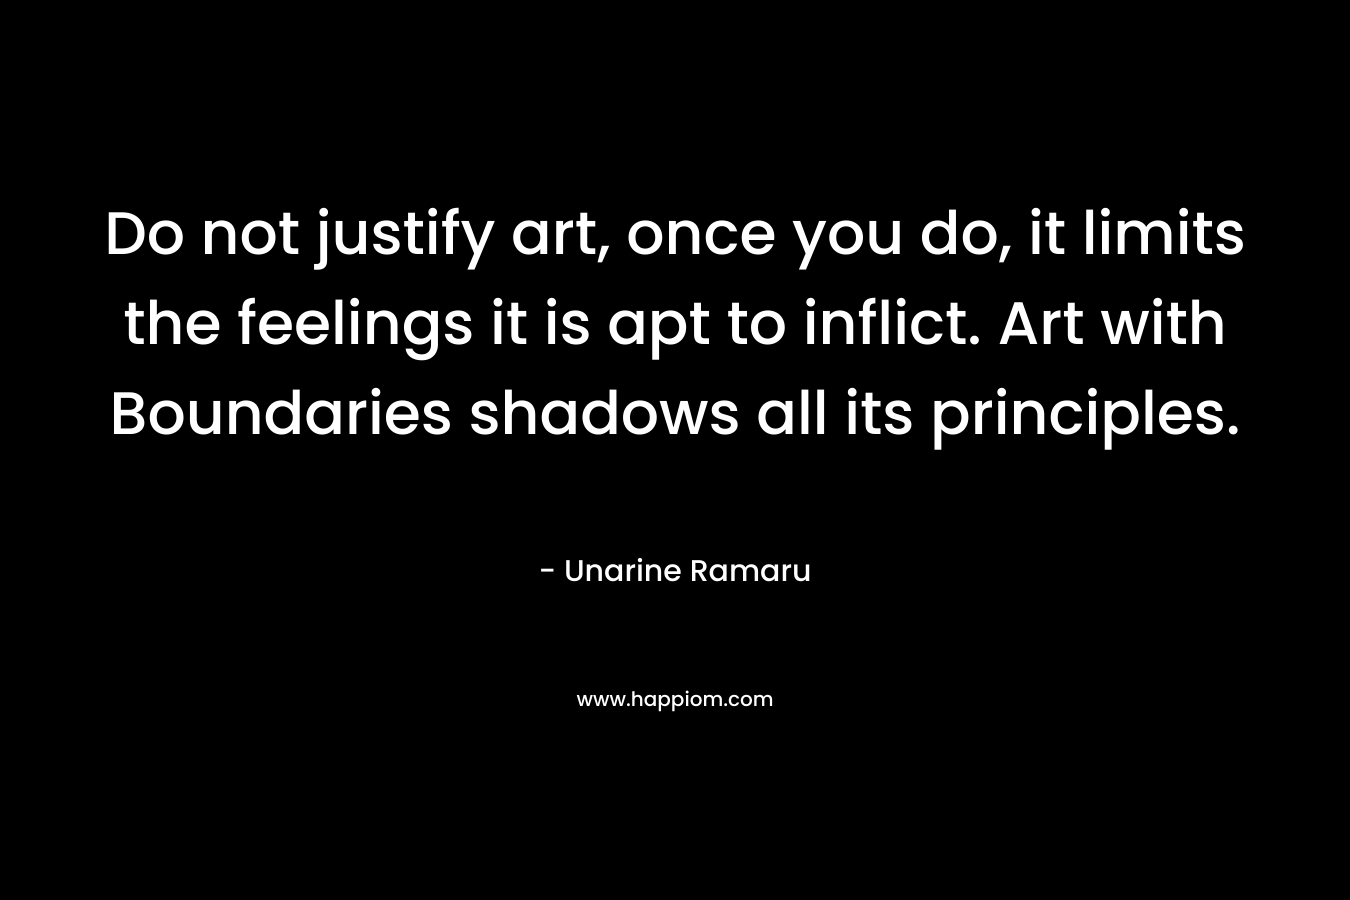 Do not justify art, once you do, it limits the feelings it is apt to inflict. Art with Boundaries shadows all its principles. – Unarine Ramaru